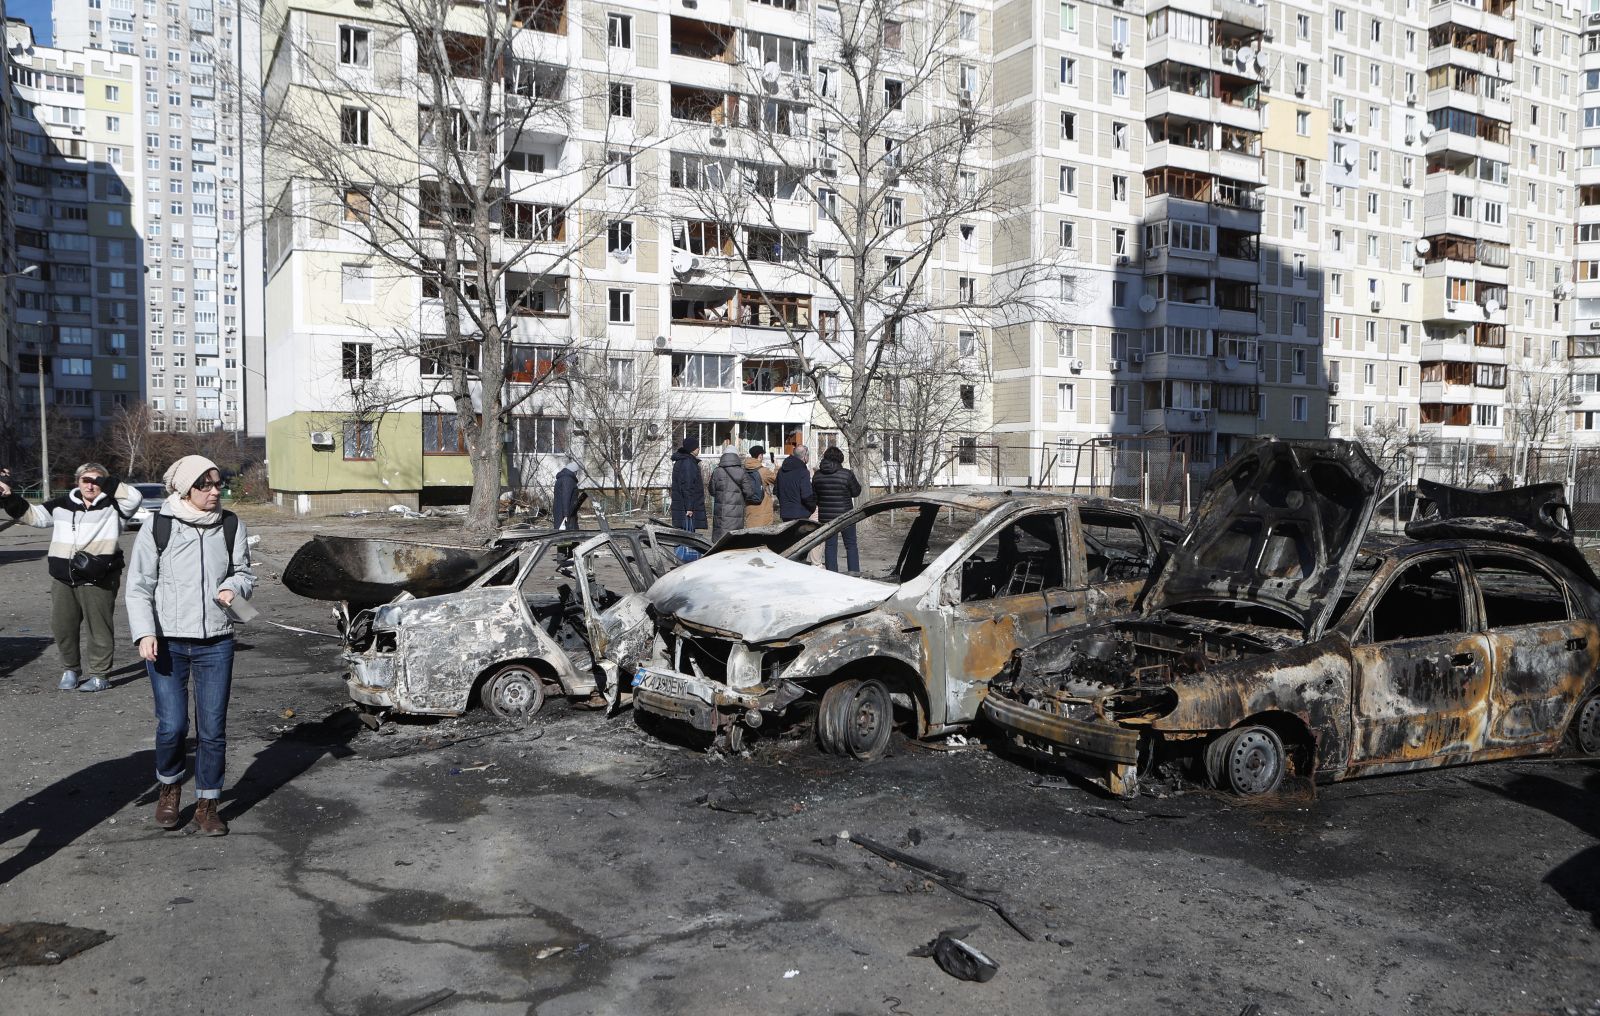 epa09791843 People walk past burned cars a day after a shelling on a residential area in Kiev, Ukraine, 28 February 2022. Russian troops entered Ukraine on 24 February prompting the country's president to declare martial law and triggering a series of severe economic sanctions imposed by Western countries on Russia.  EPA/SERGEY DOLZHENKO